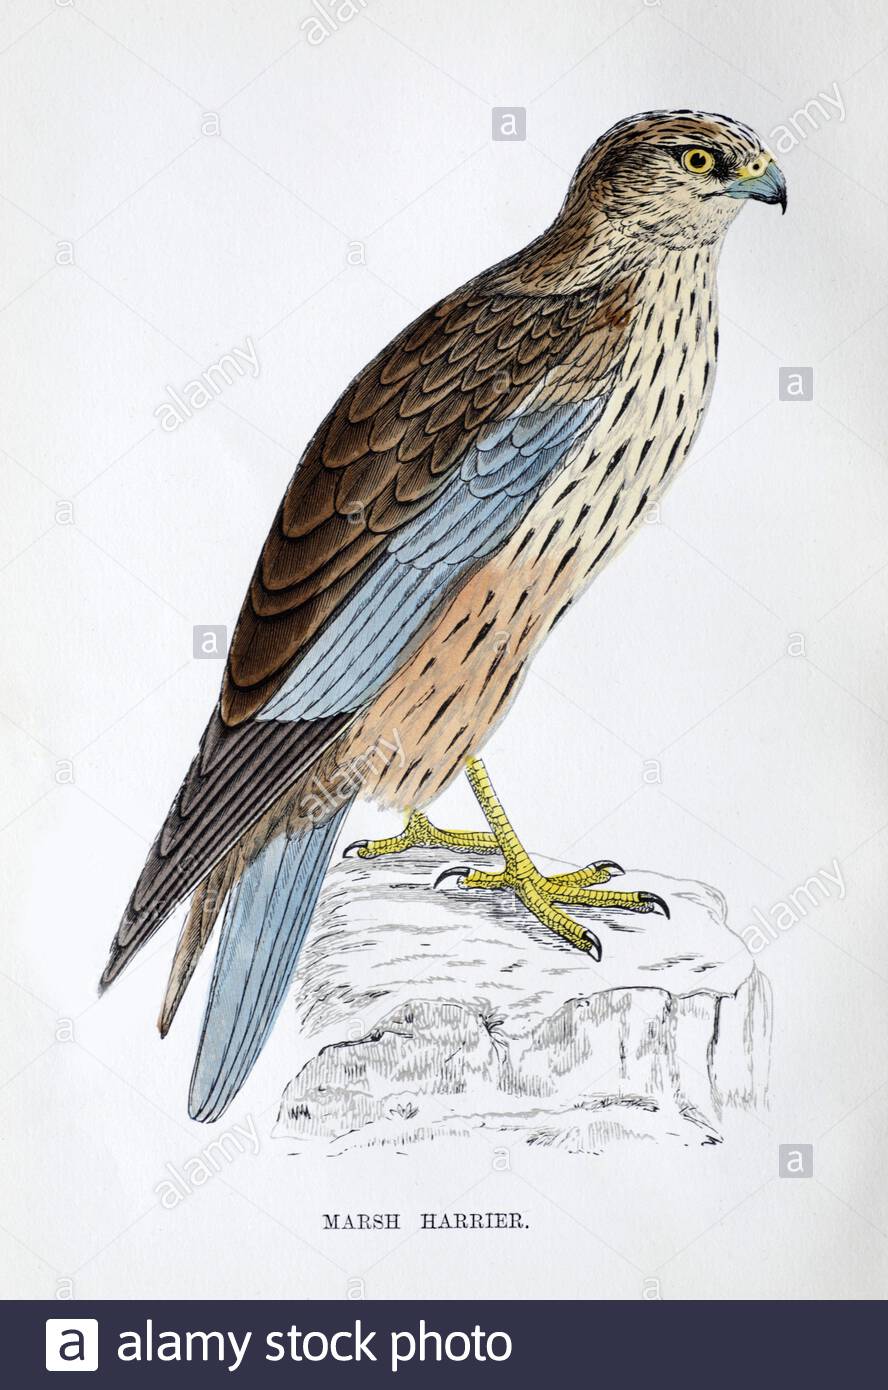 Marsh Harrier (Circus aeruginosus) vintage illustration, from A History of British Birds by Rev. Francis Orpen Morris, published in c1850 Stock Photo